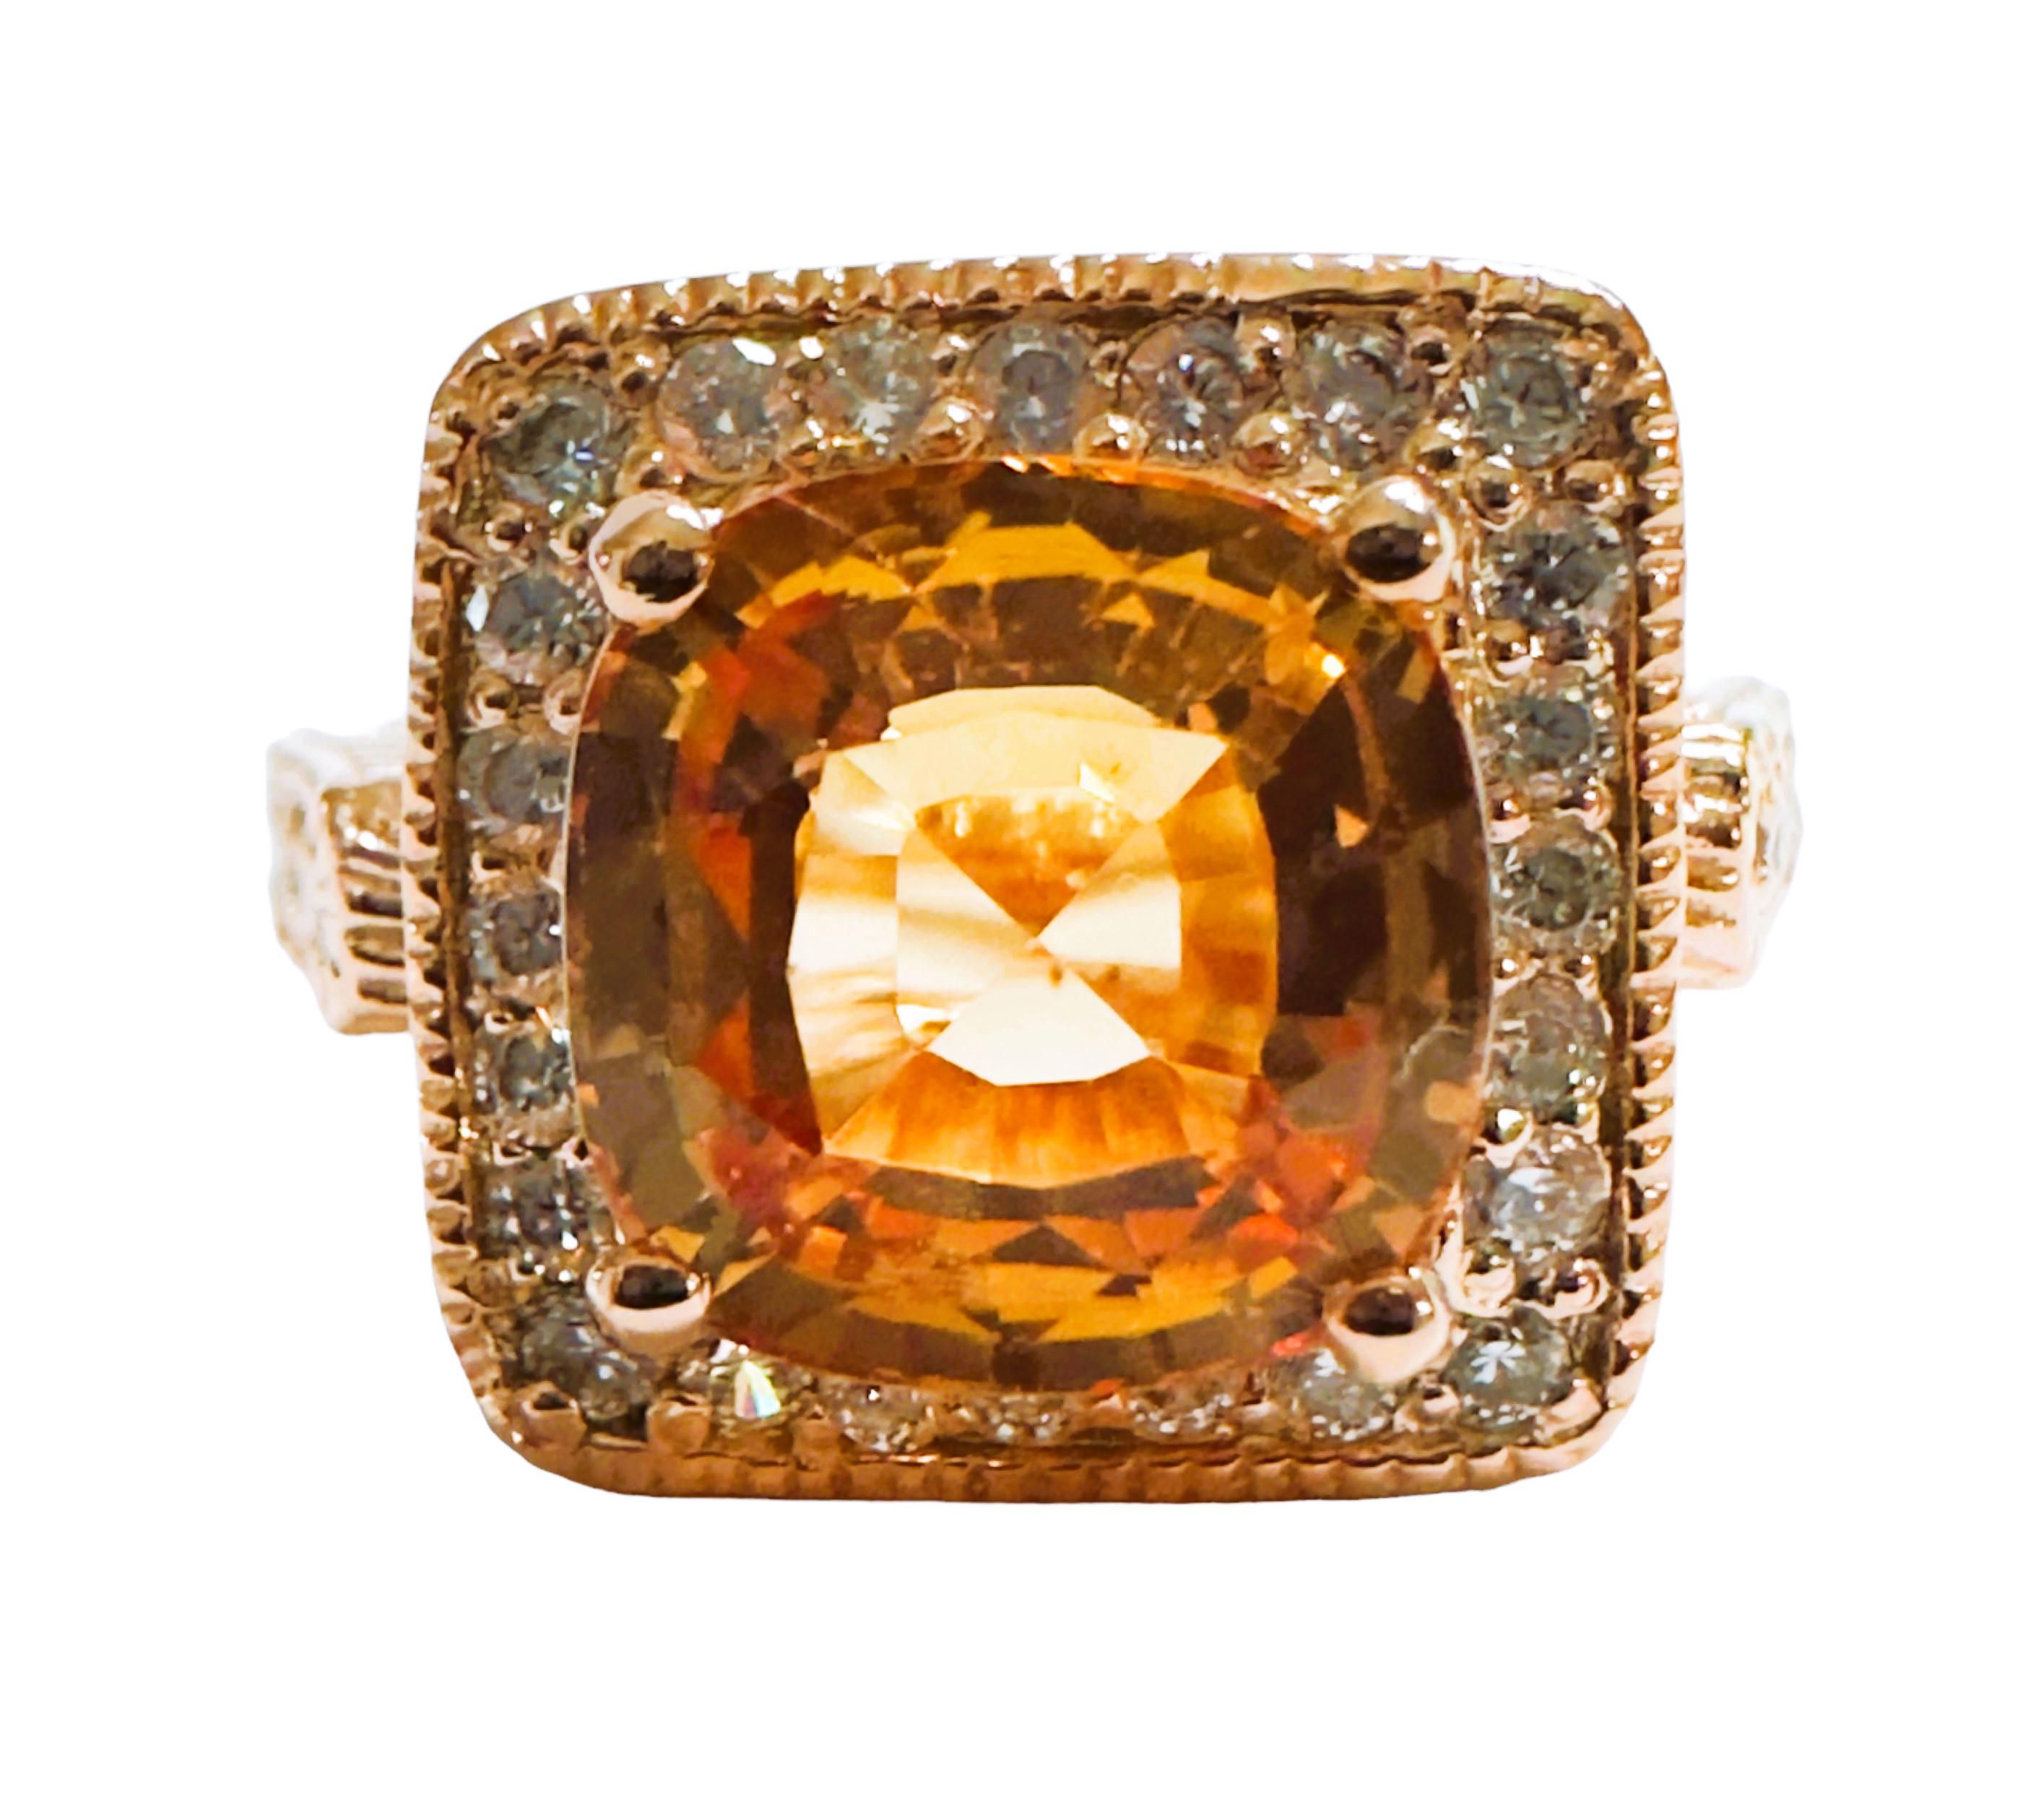 This ring is just beautiful. The ring is a size 7.   The stone is from Africa and is just exquisite. The IF stands for 